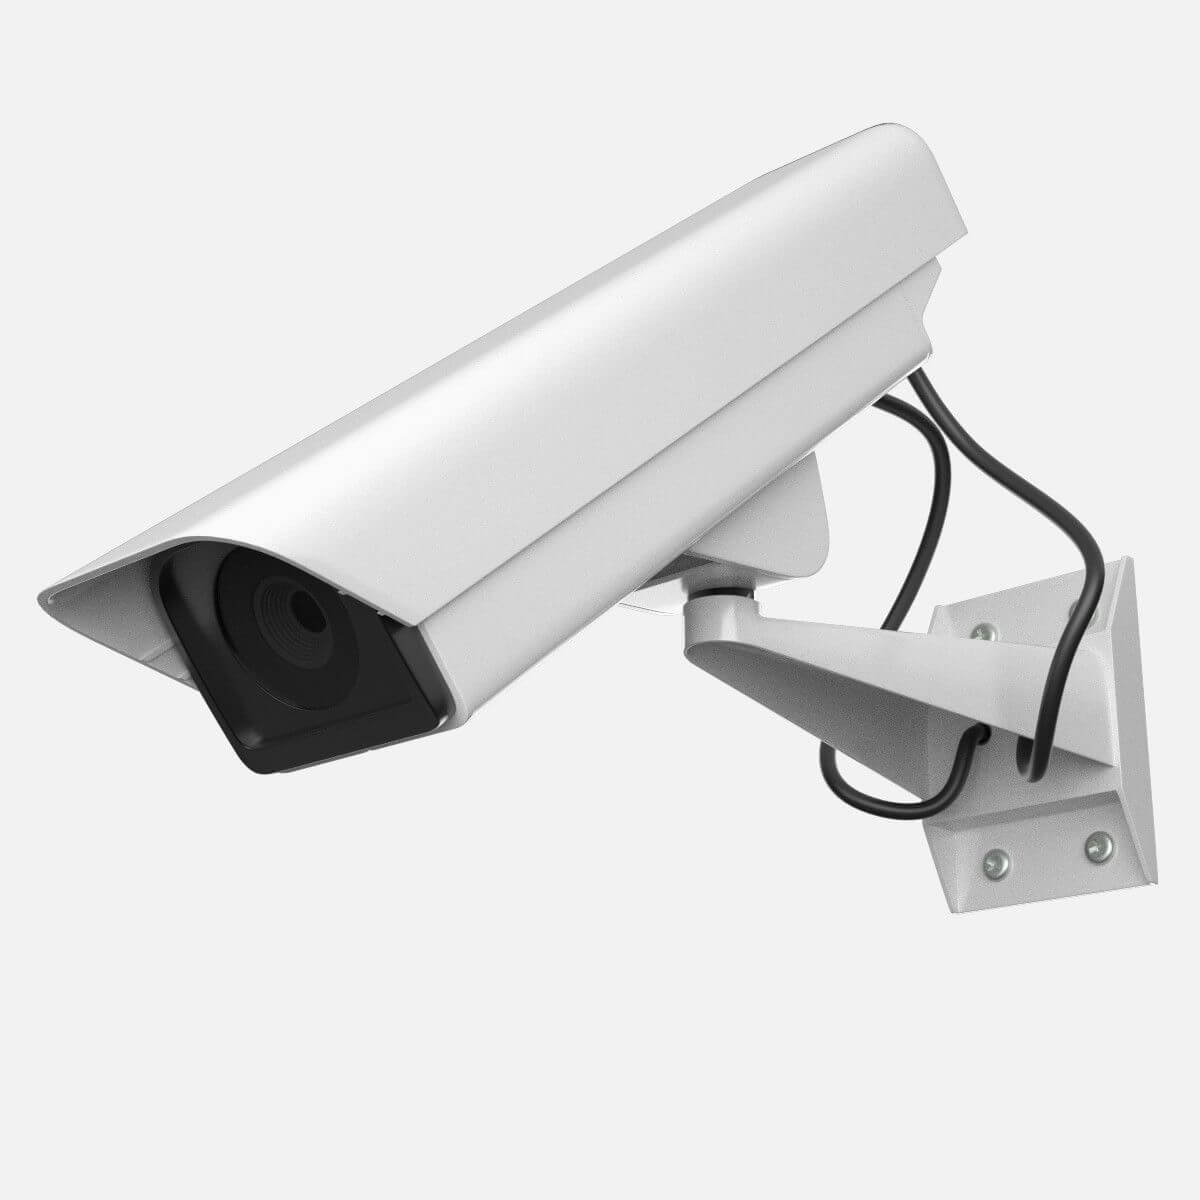 Top 3 Benefits Of Getting A CCTV Security Camera Installed To Your Property